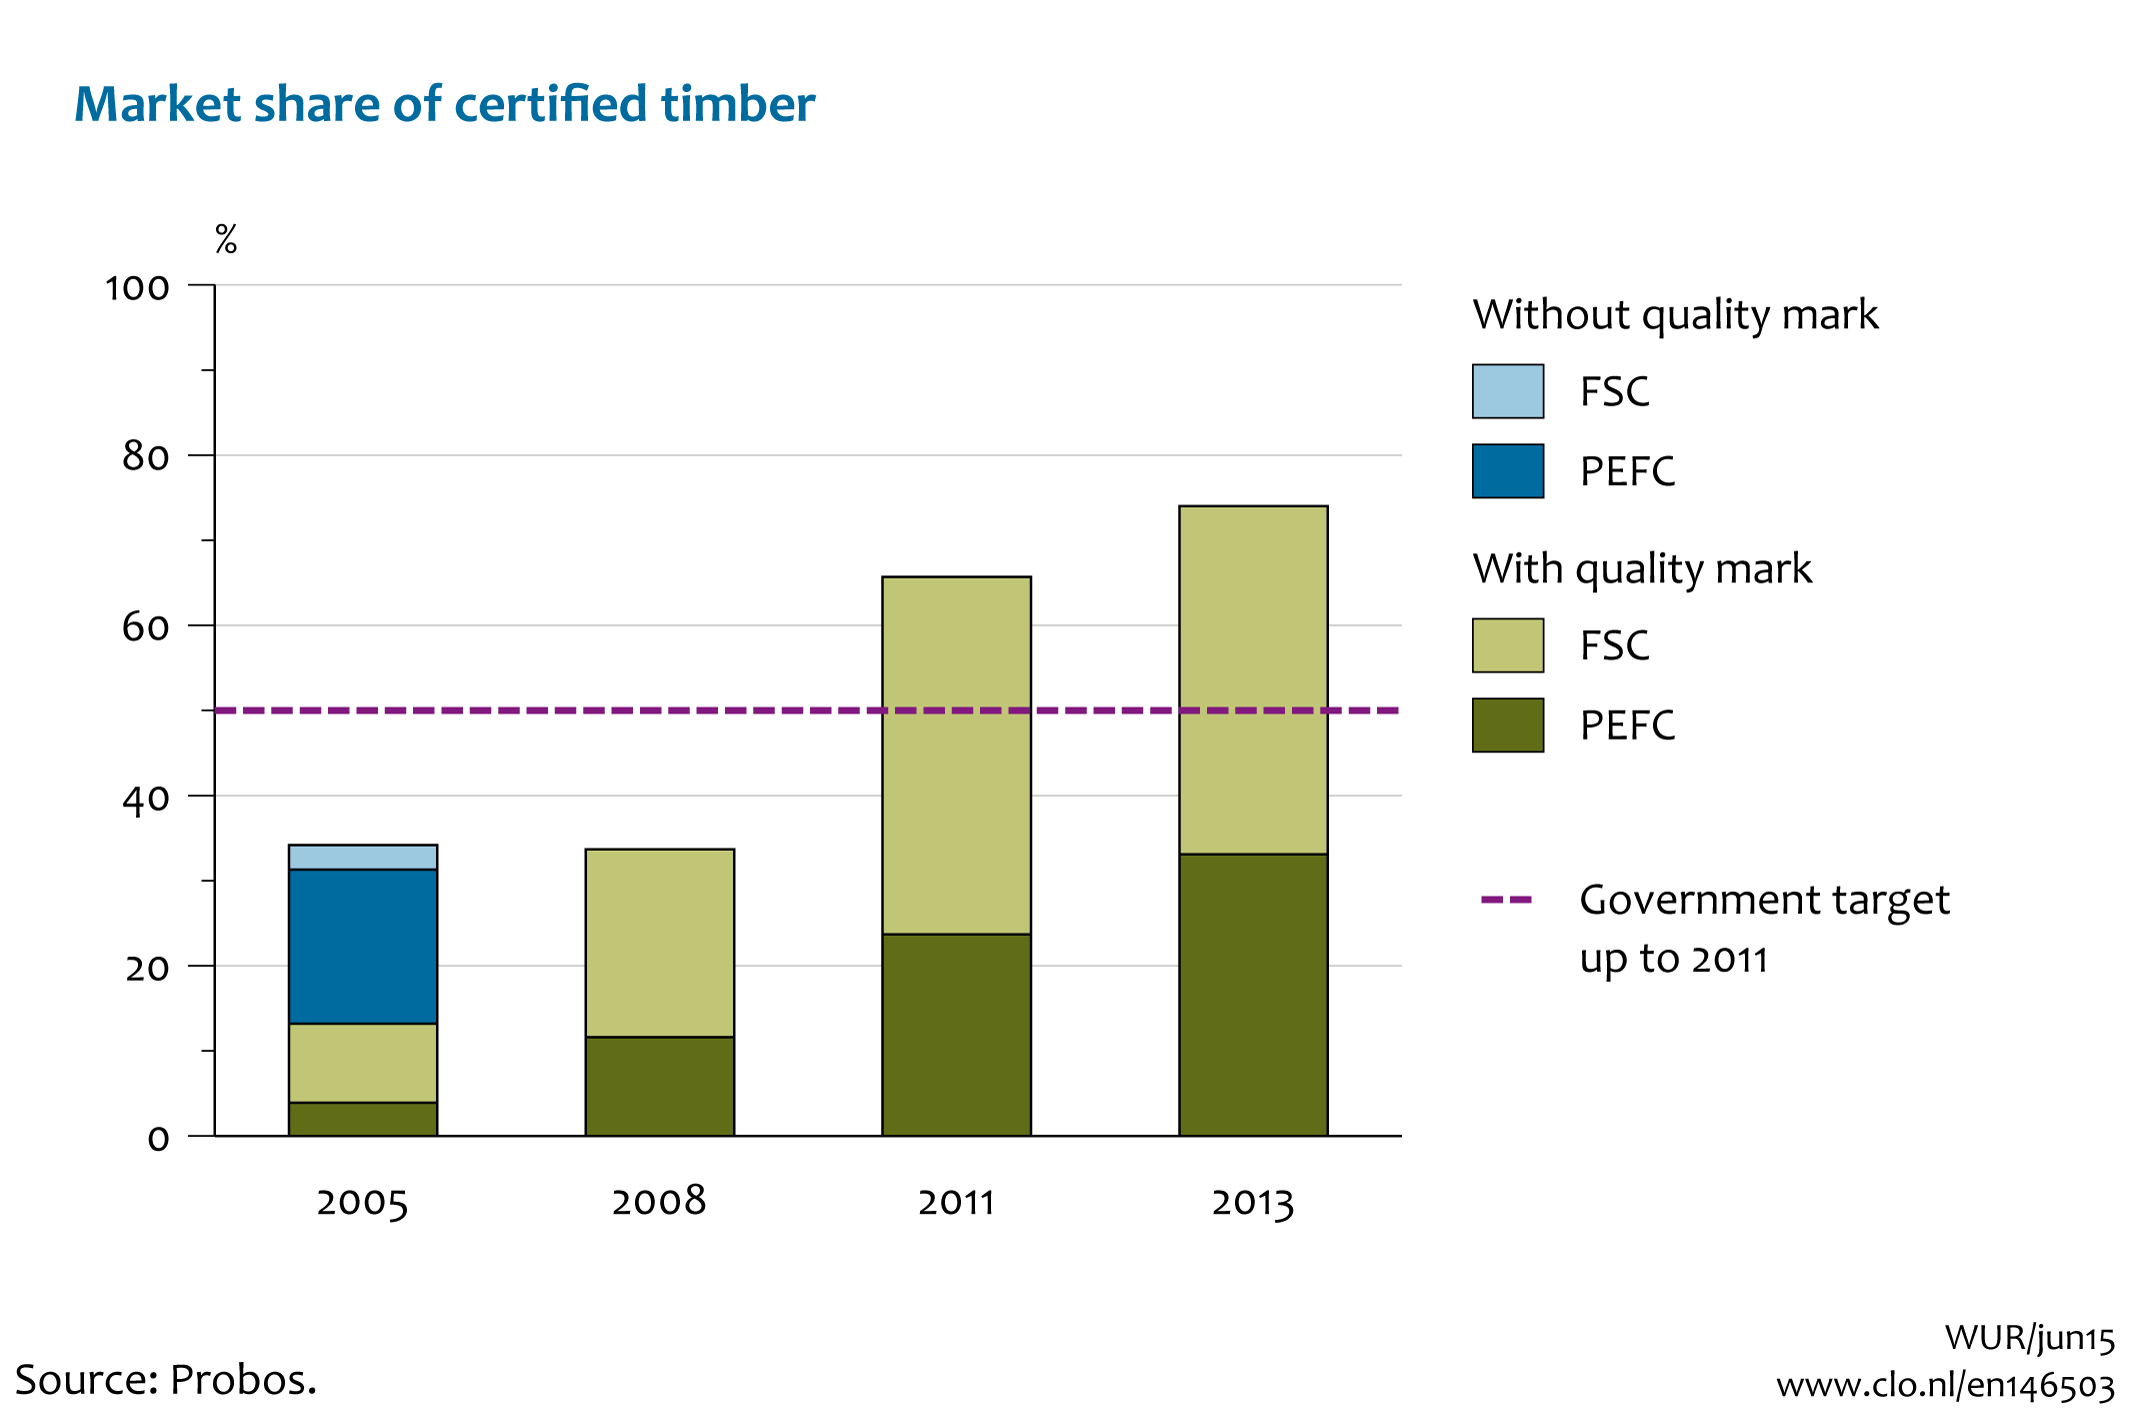 Image Market share of certified timber. The image is further explained in the text.